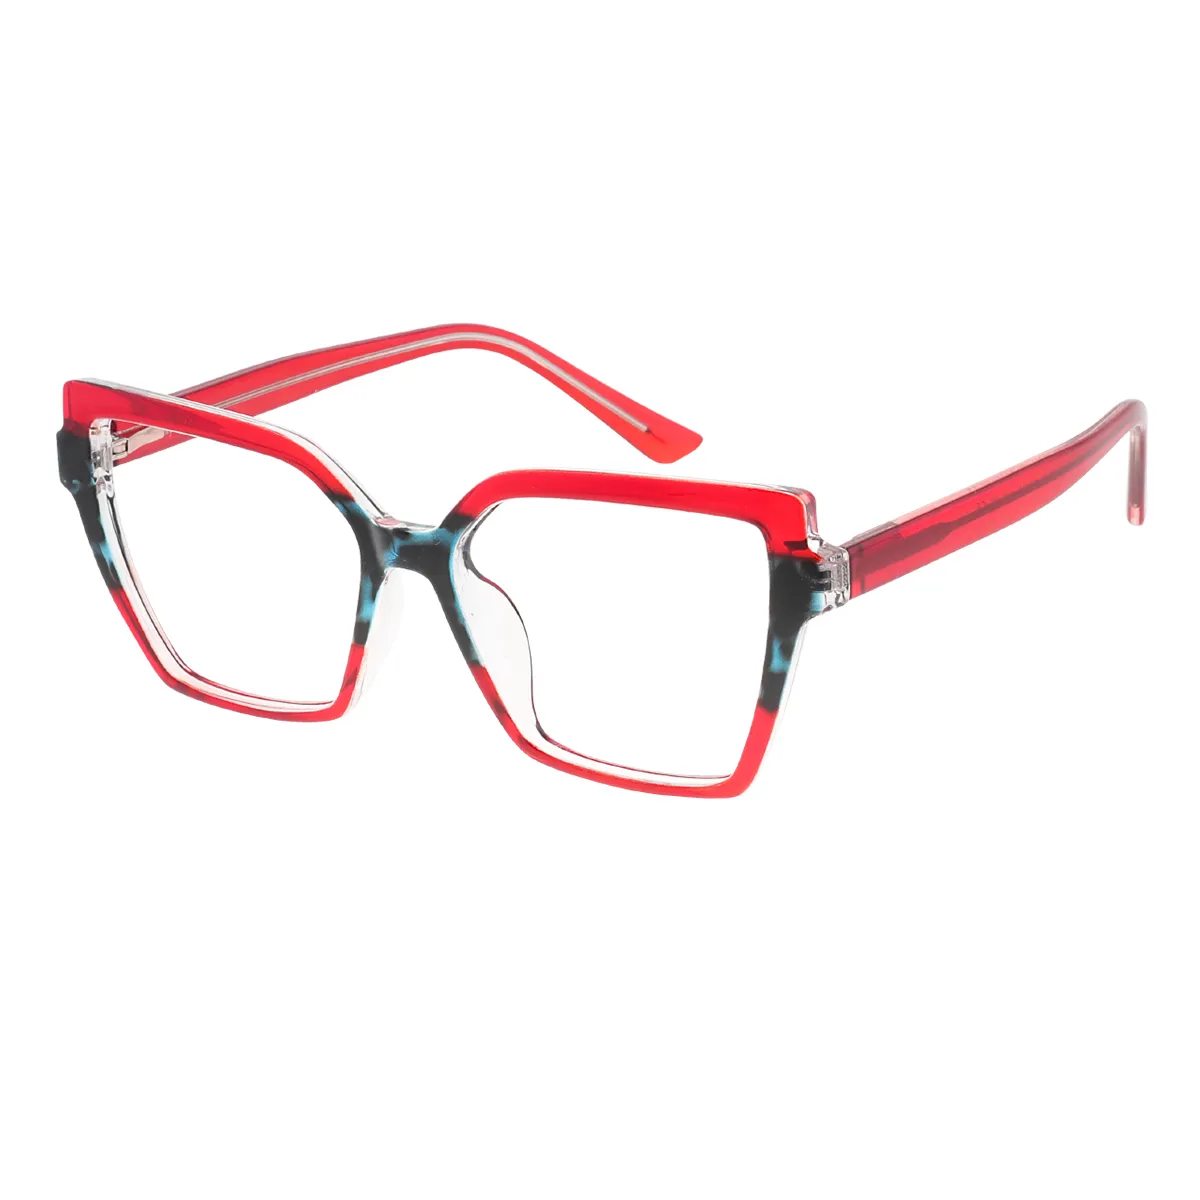 Fashion Square Red Glasses for Women